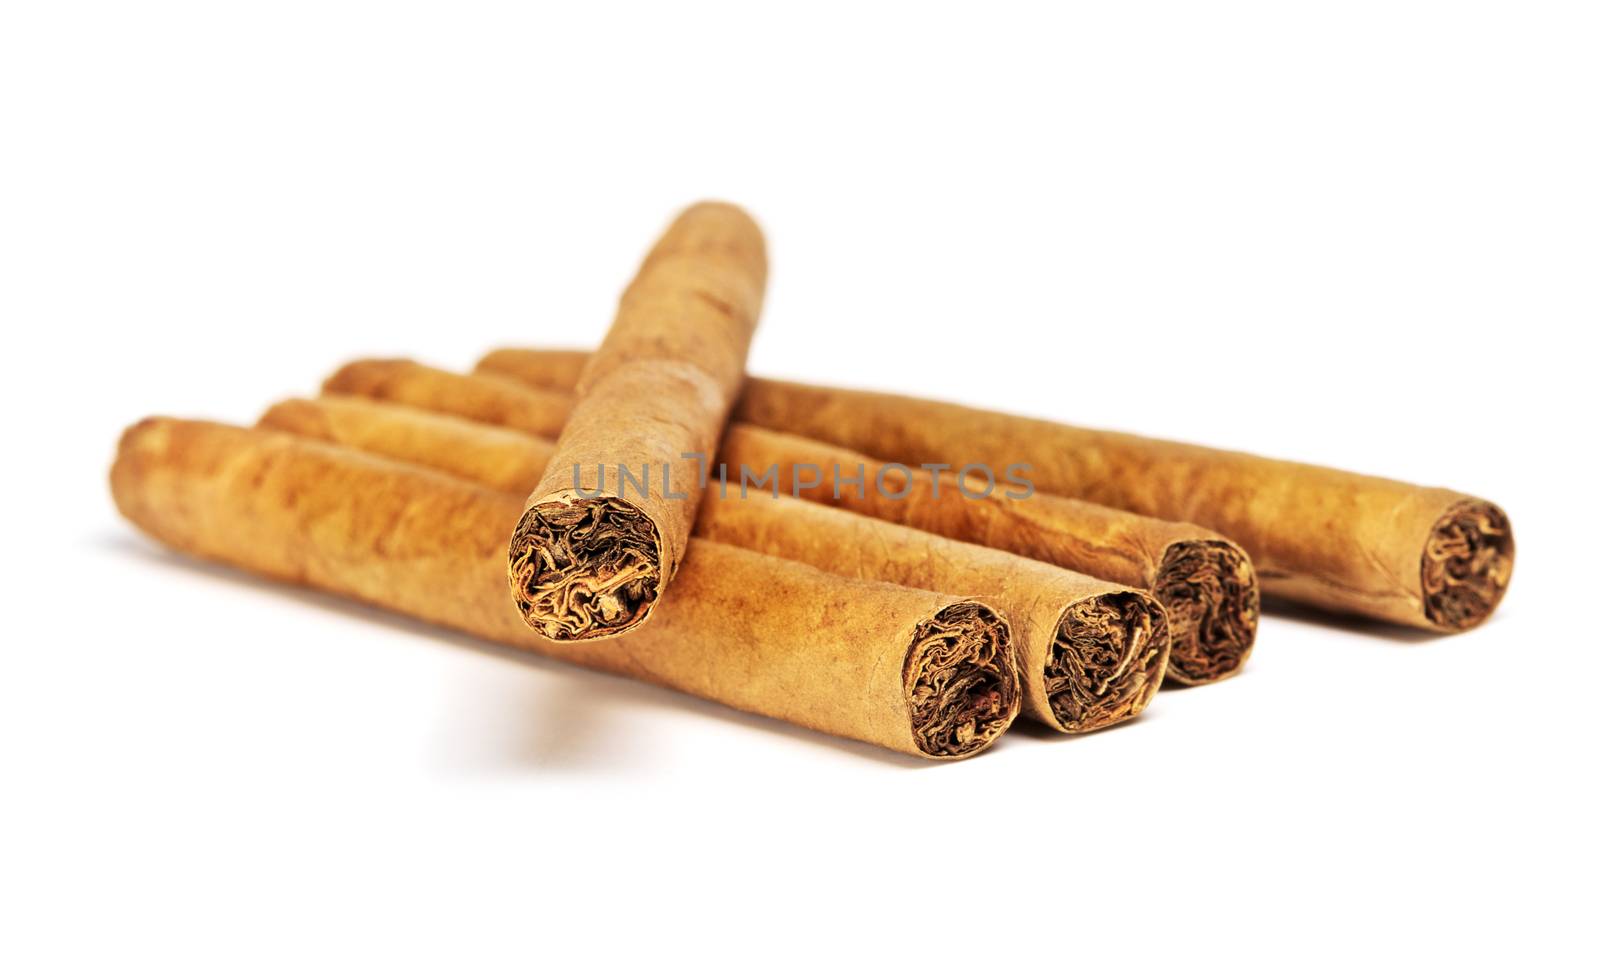 little cigars close up, isolated on white